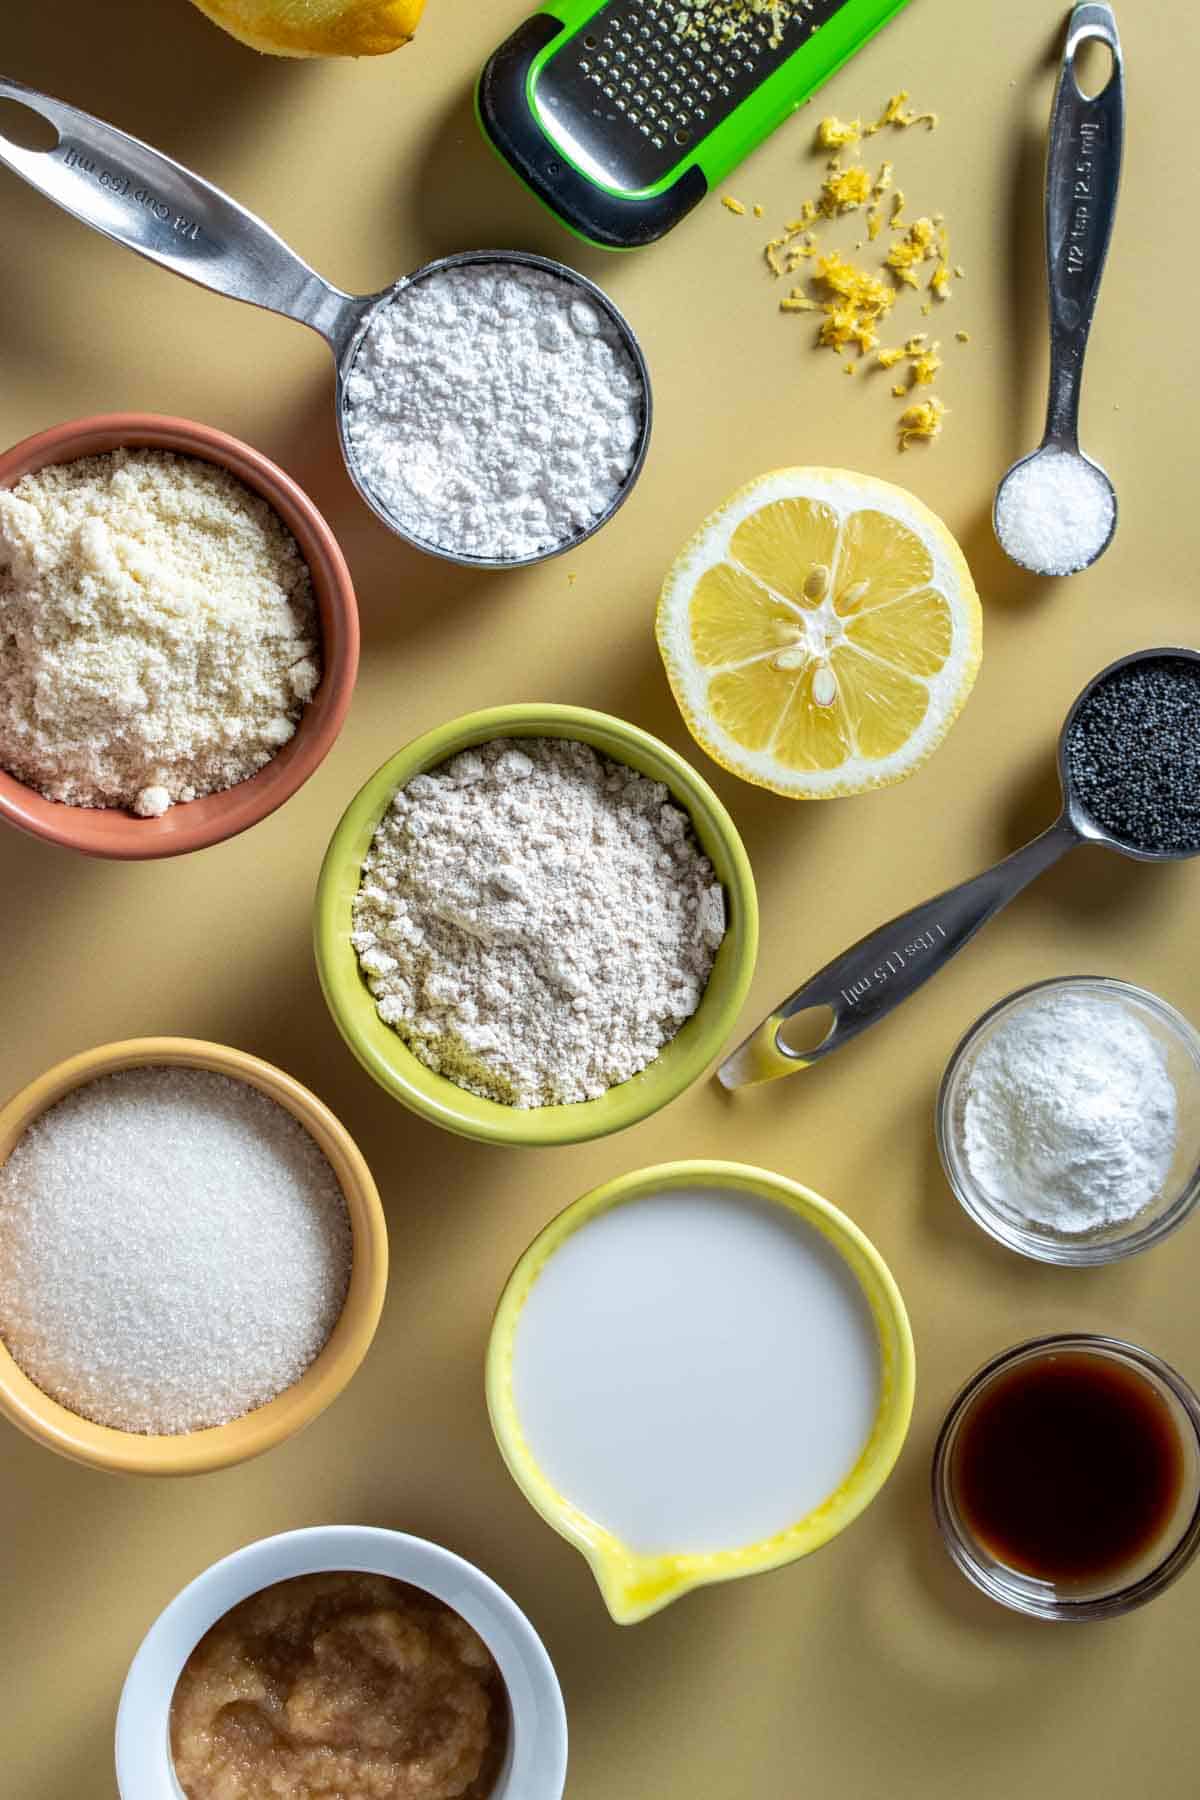 Top view of ingredients needed to make lemon poppy seed muffins, some in colored bowls and some right on the yellow surface.